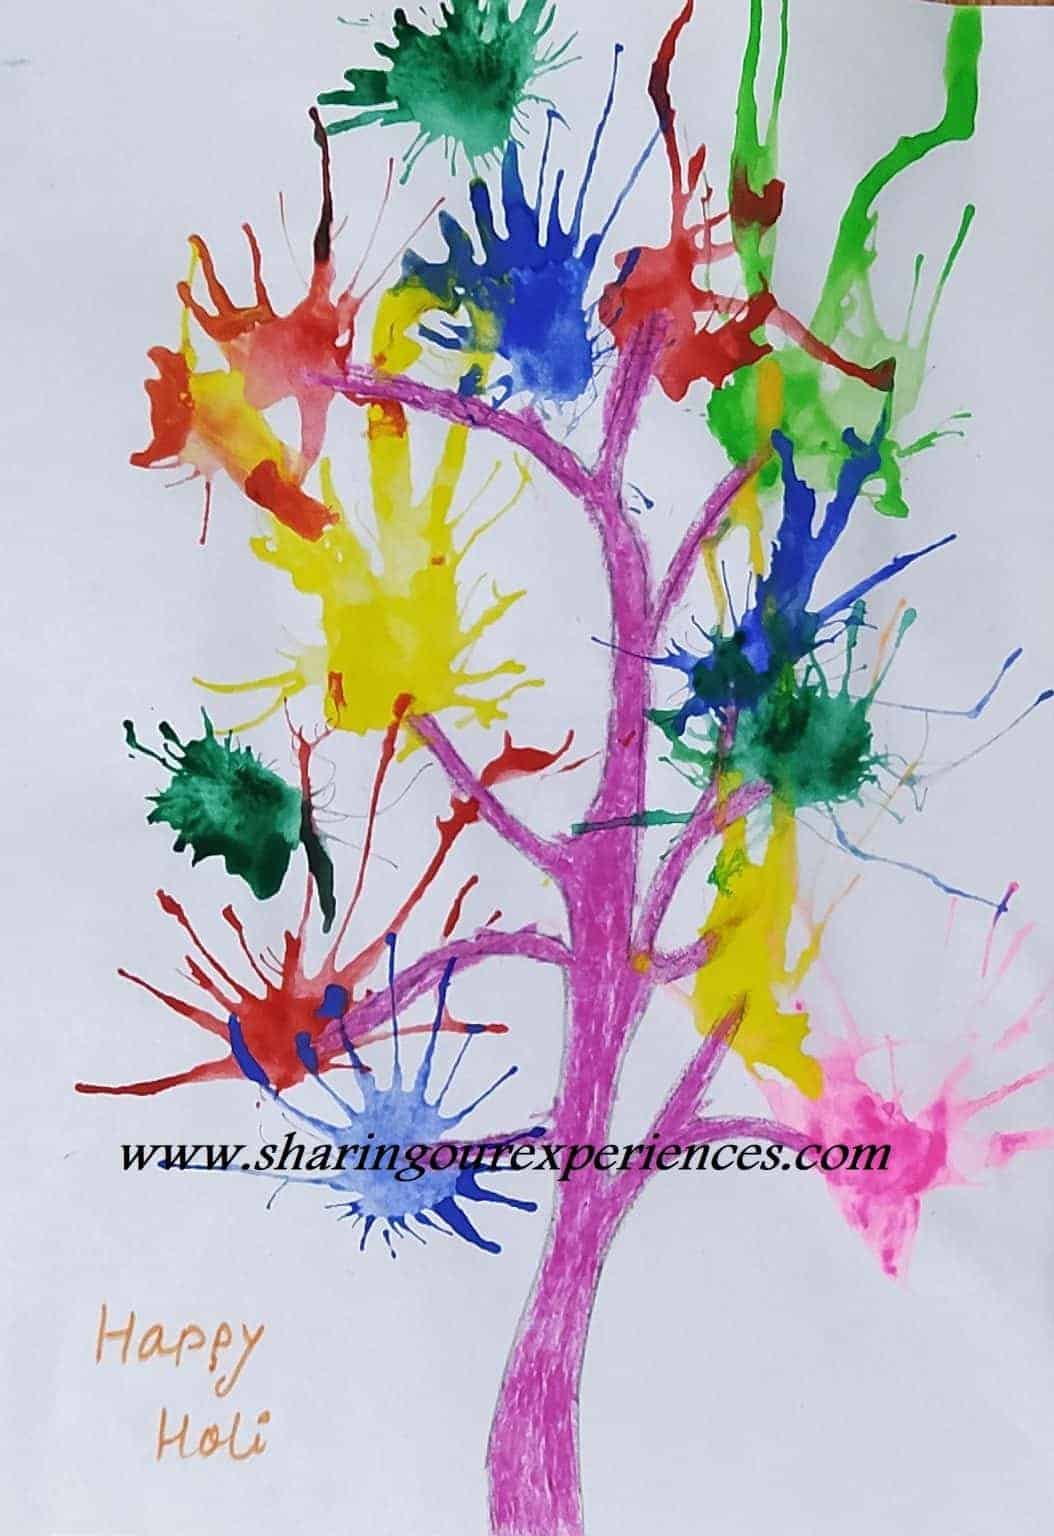 Fun Holi Crafts and Activities for kids - Download Free Holi printables